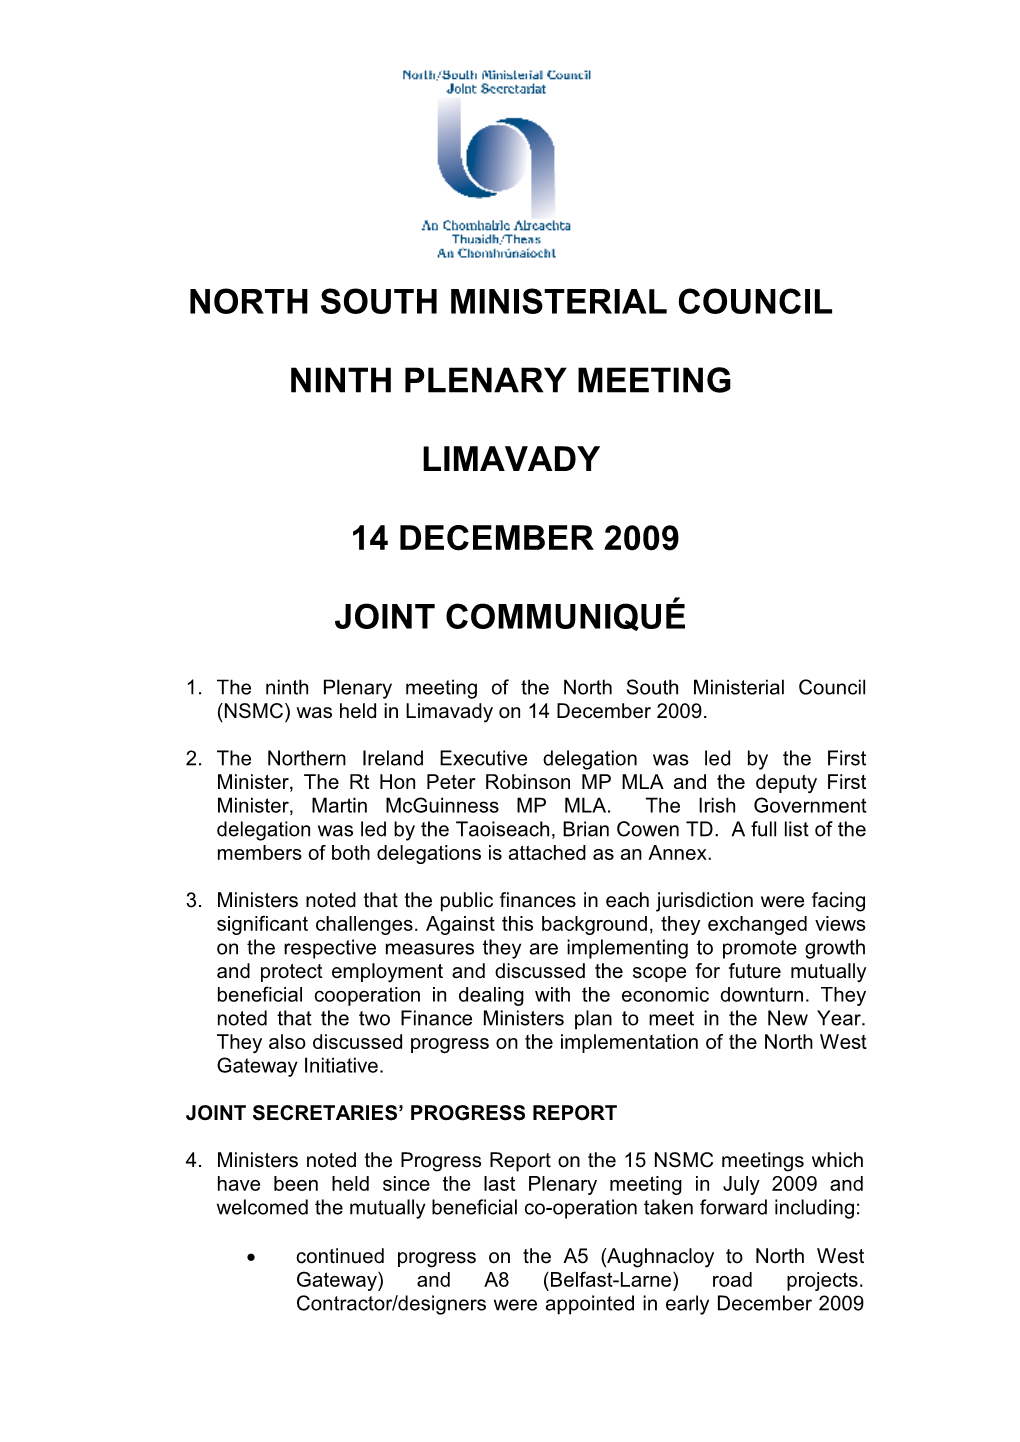 North South Ministerial Council Ninth Plenary